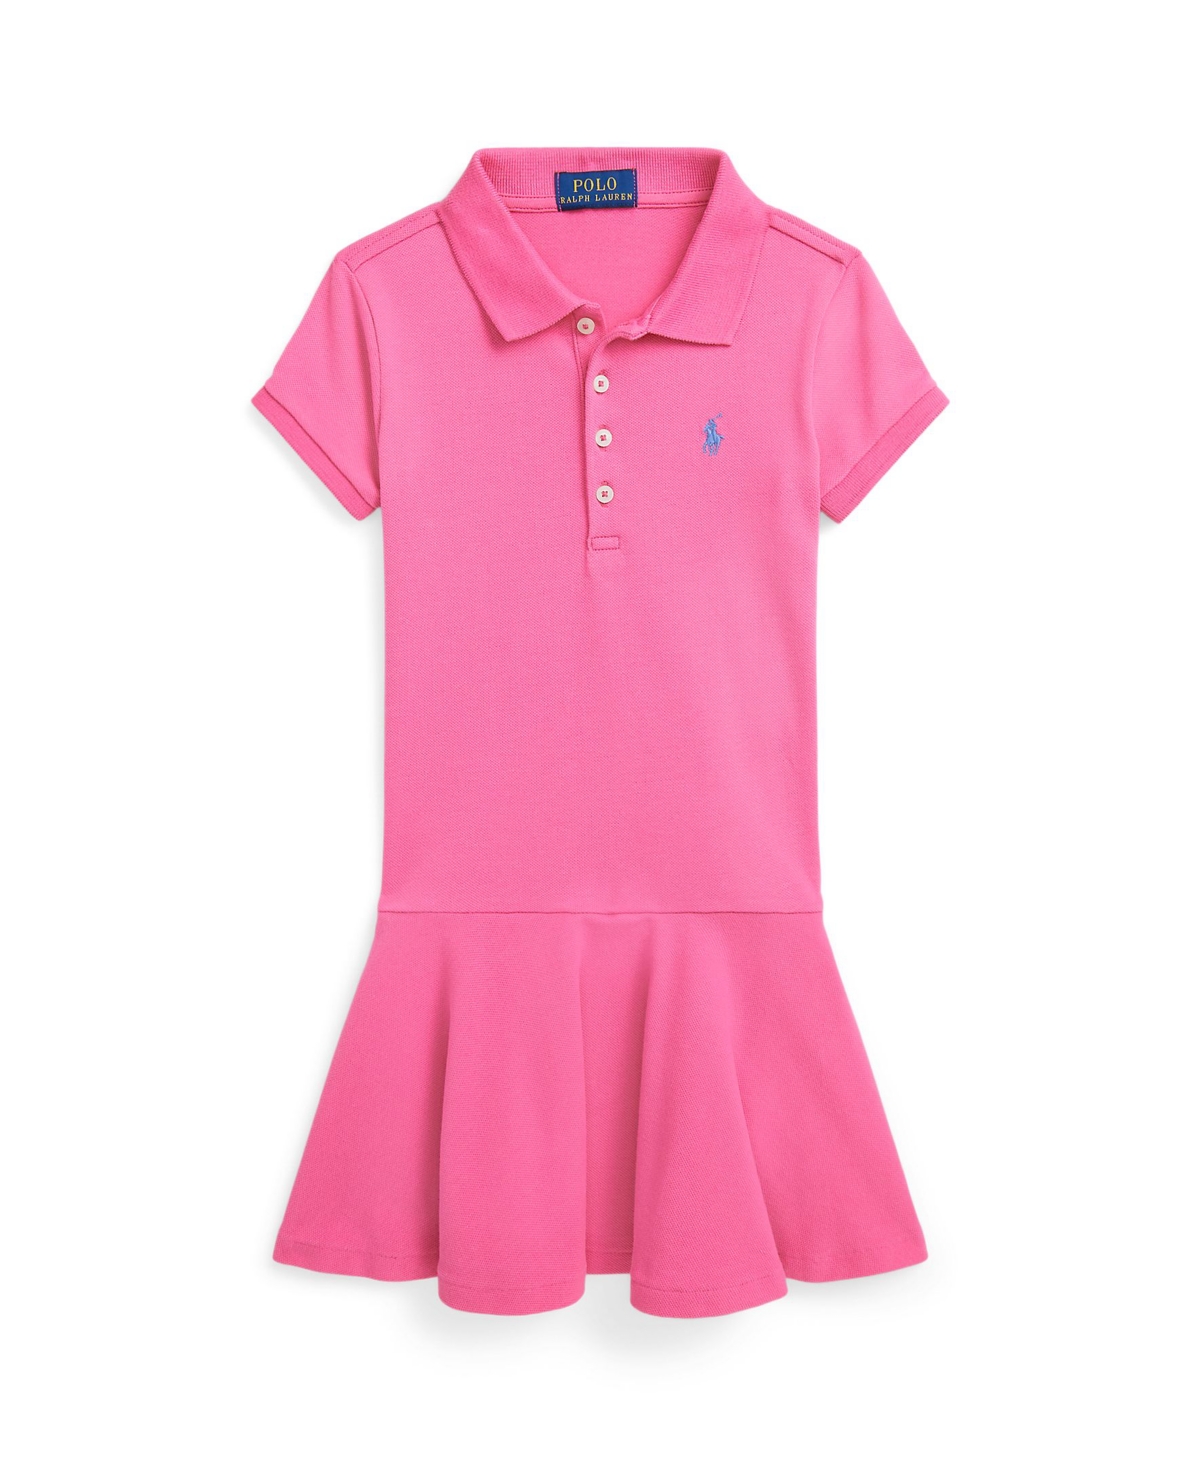 Polo Ralph Lauren Kids' Toddler And Little Girls Stretch Mesh Polo Dress In Belmont Pink With New England Blue